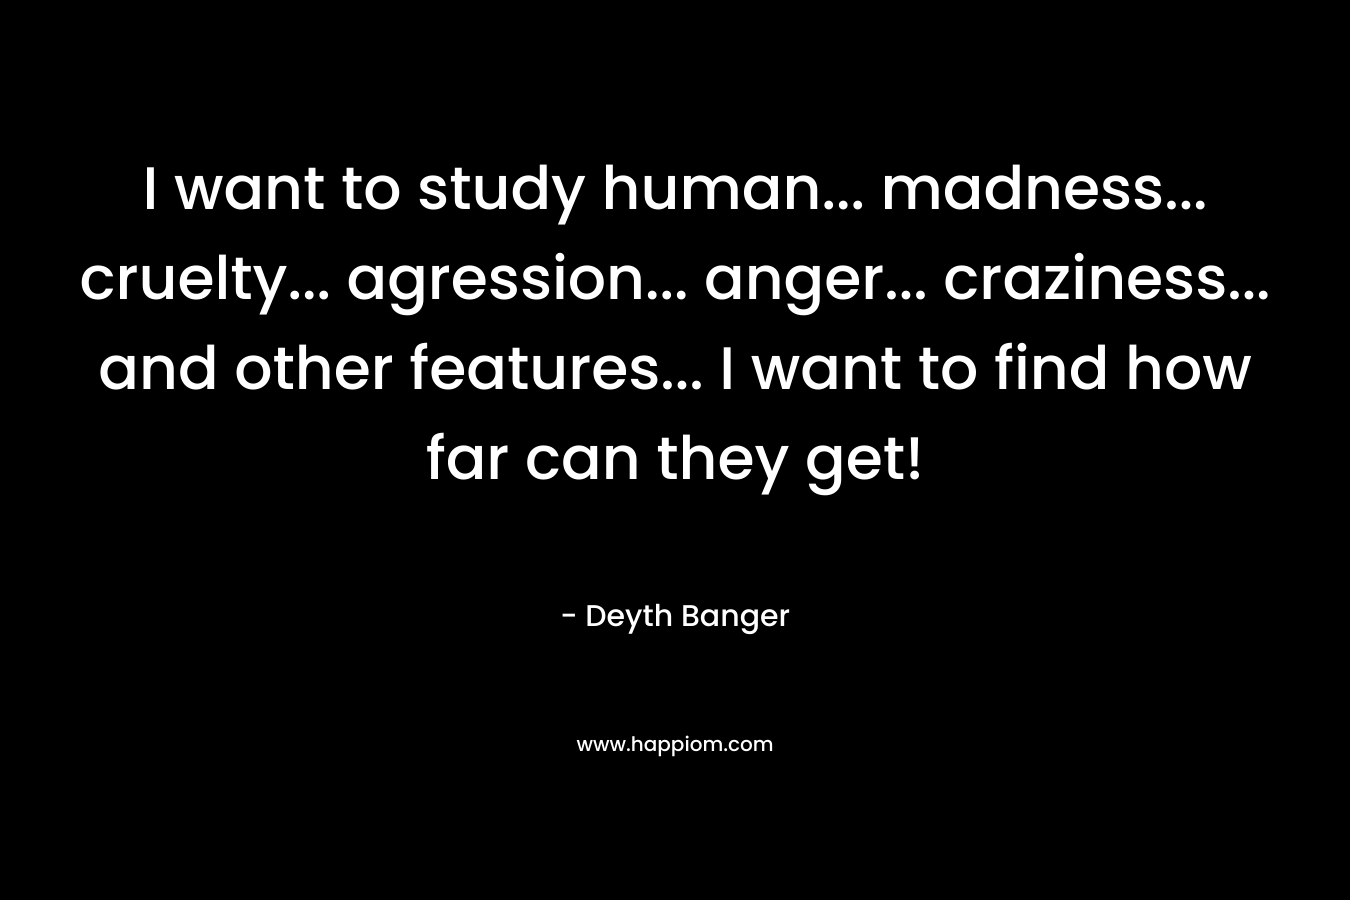 I want to study human... madness... cruelty... agression... anger... craziness... and other features... I want to find how far can they get!